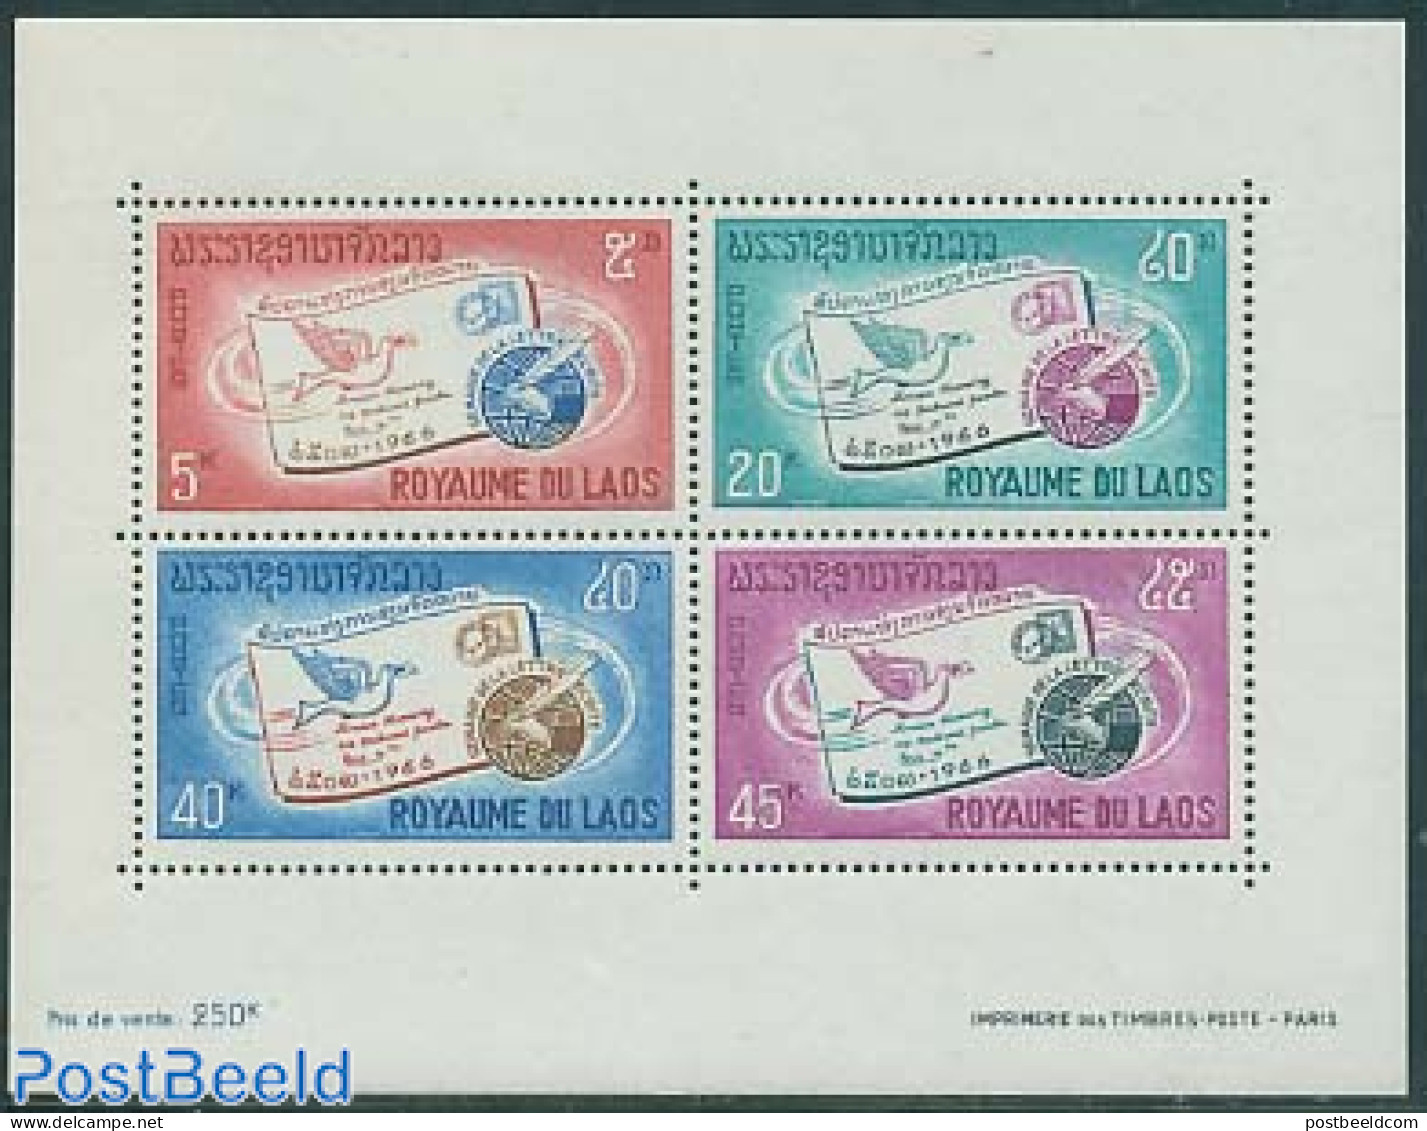 Laos 1966 Int. Letter Week S/s, Mint NH, Nature - Birds - Post - Stamps On Stamps - Pigeons - Poste